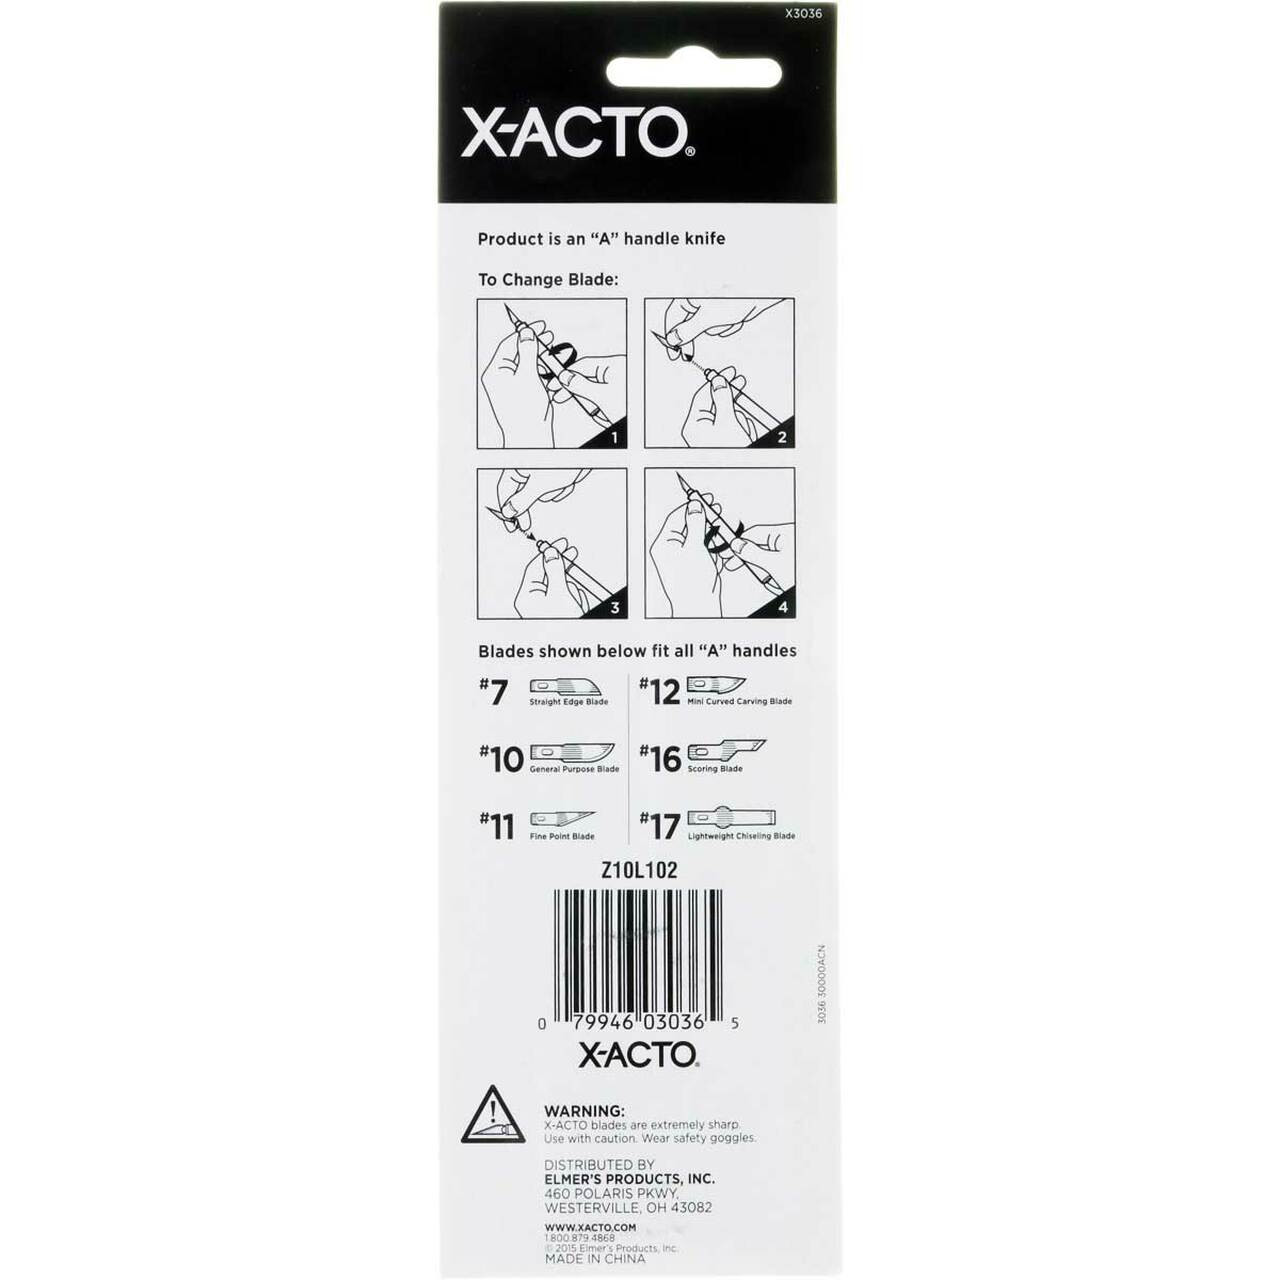 X-Acto No.1 Knife with Safety Cap for Cutting and Trimming, 1 Count 